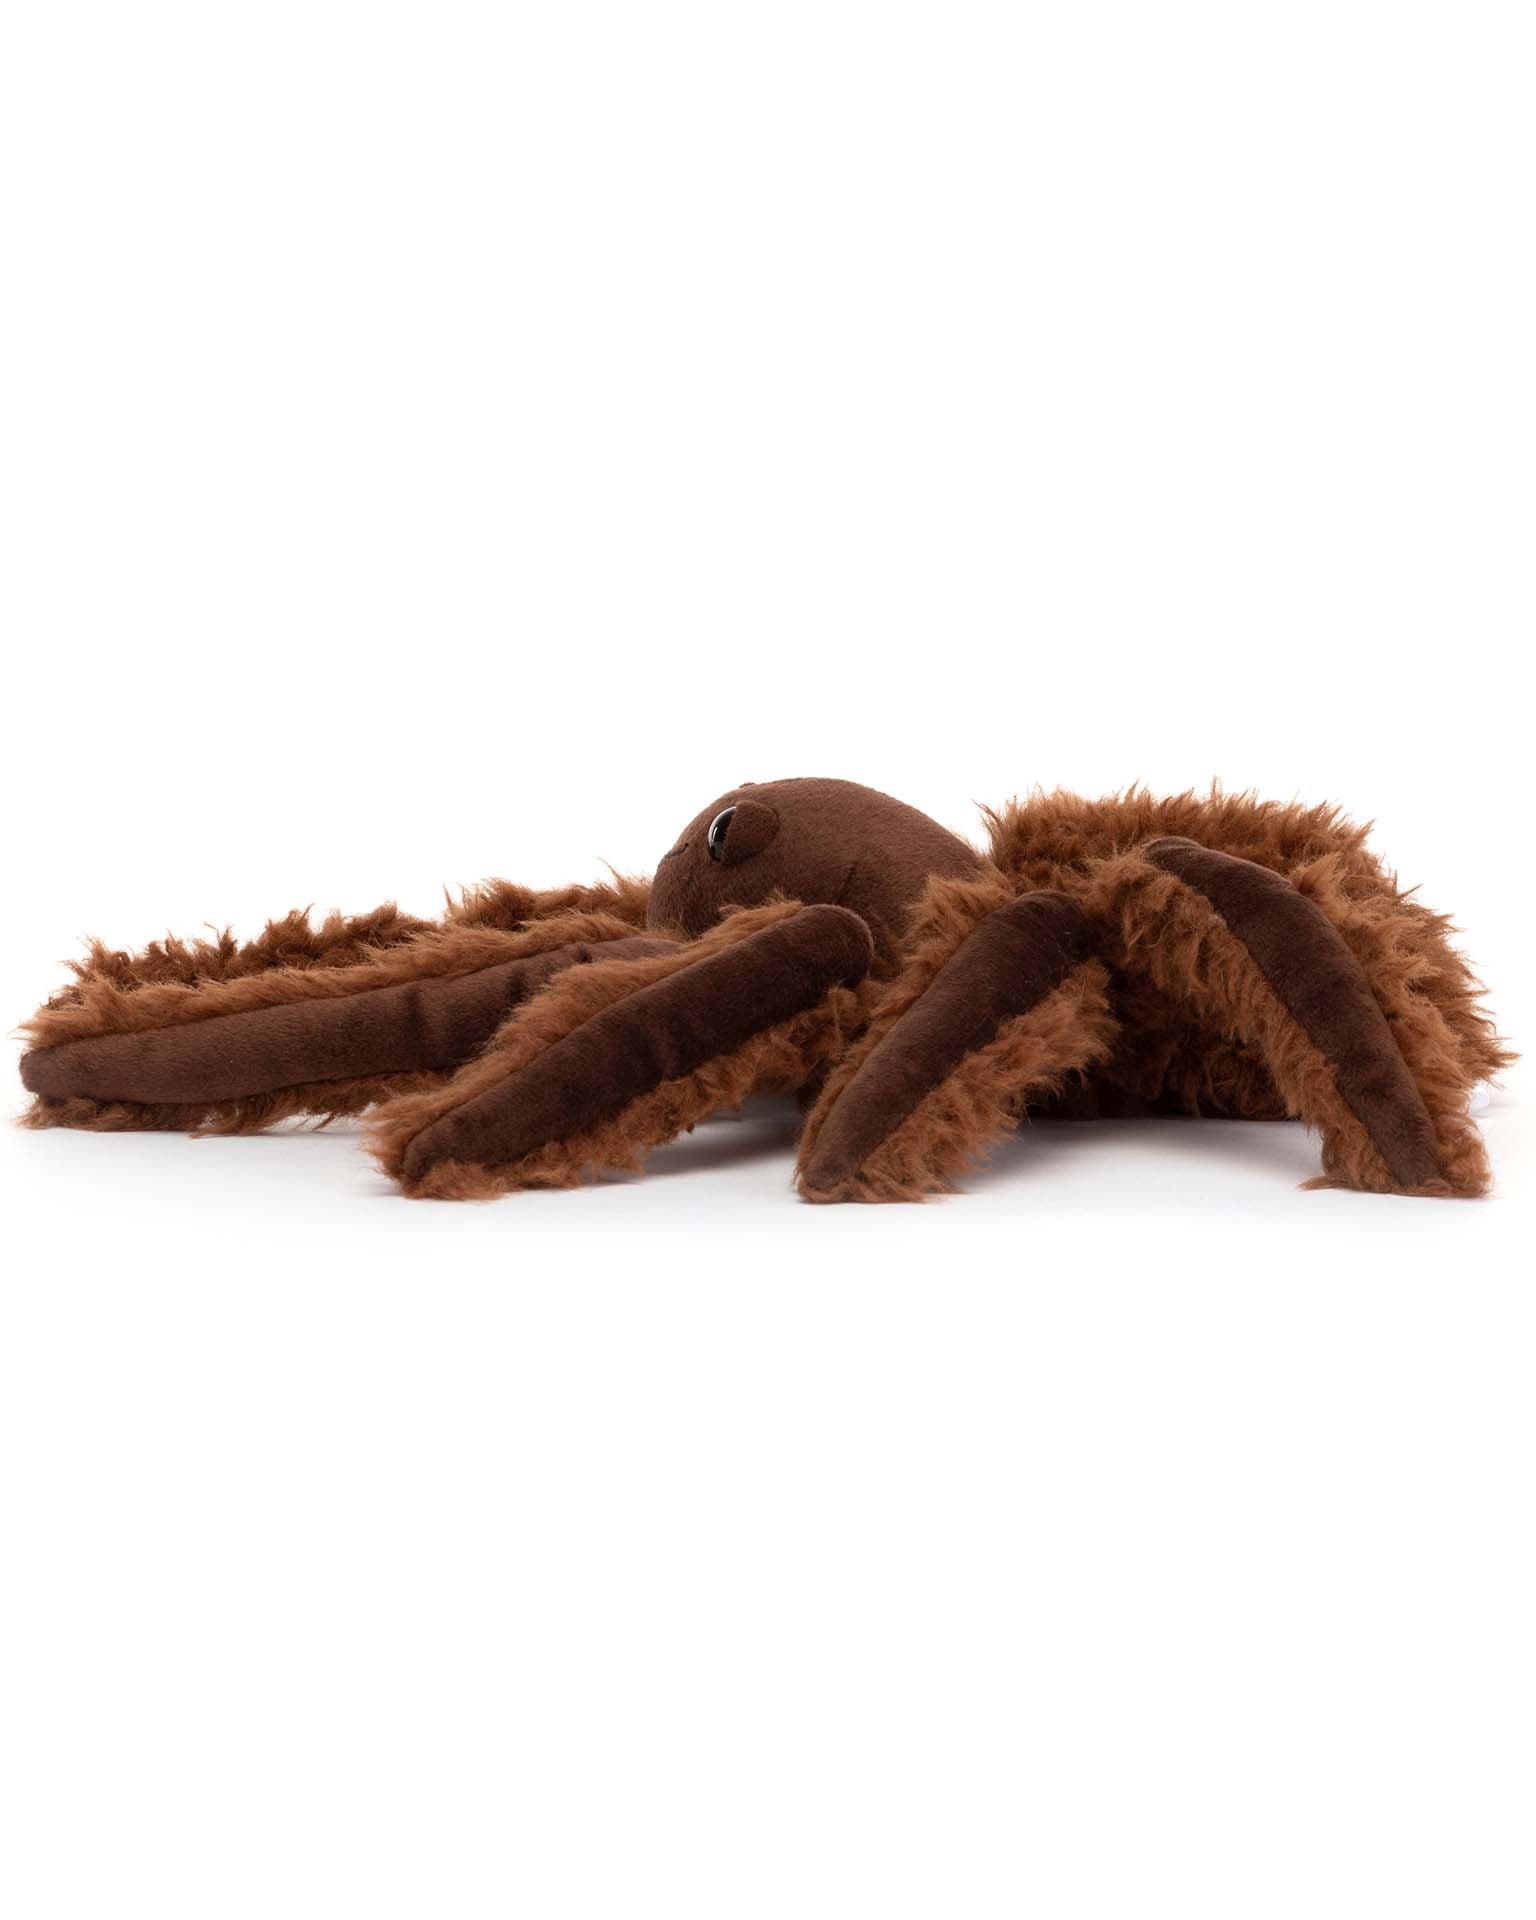 Little jellycat play spindleshanks spider small